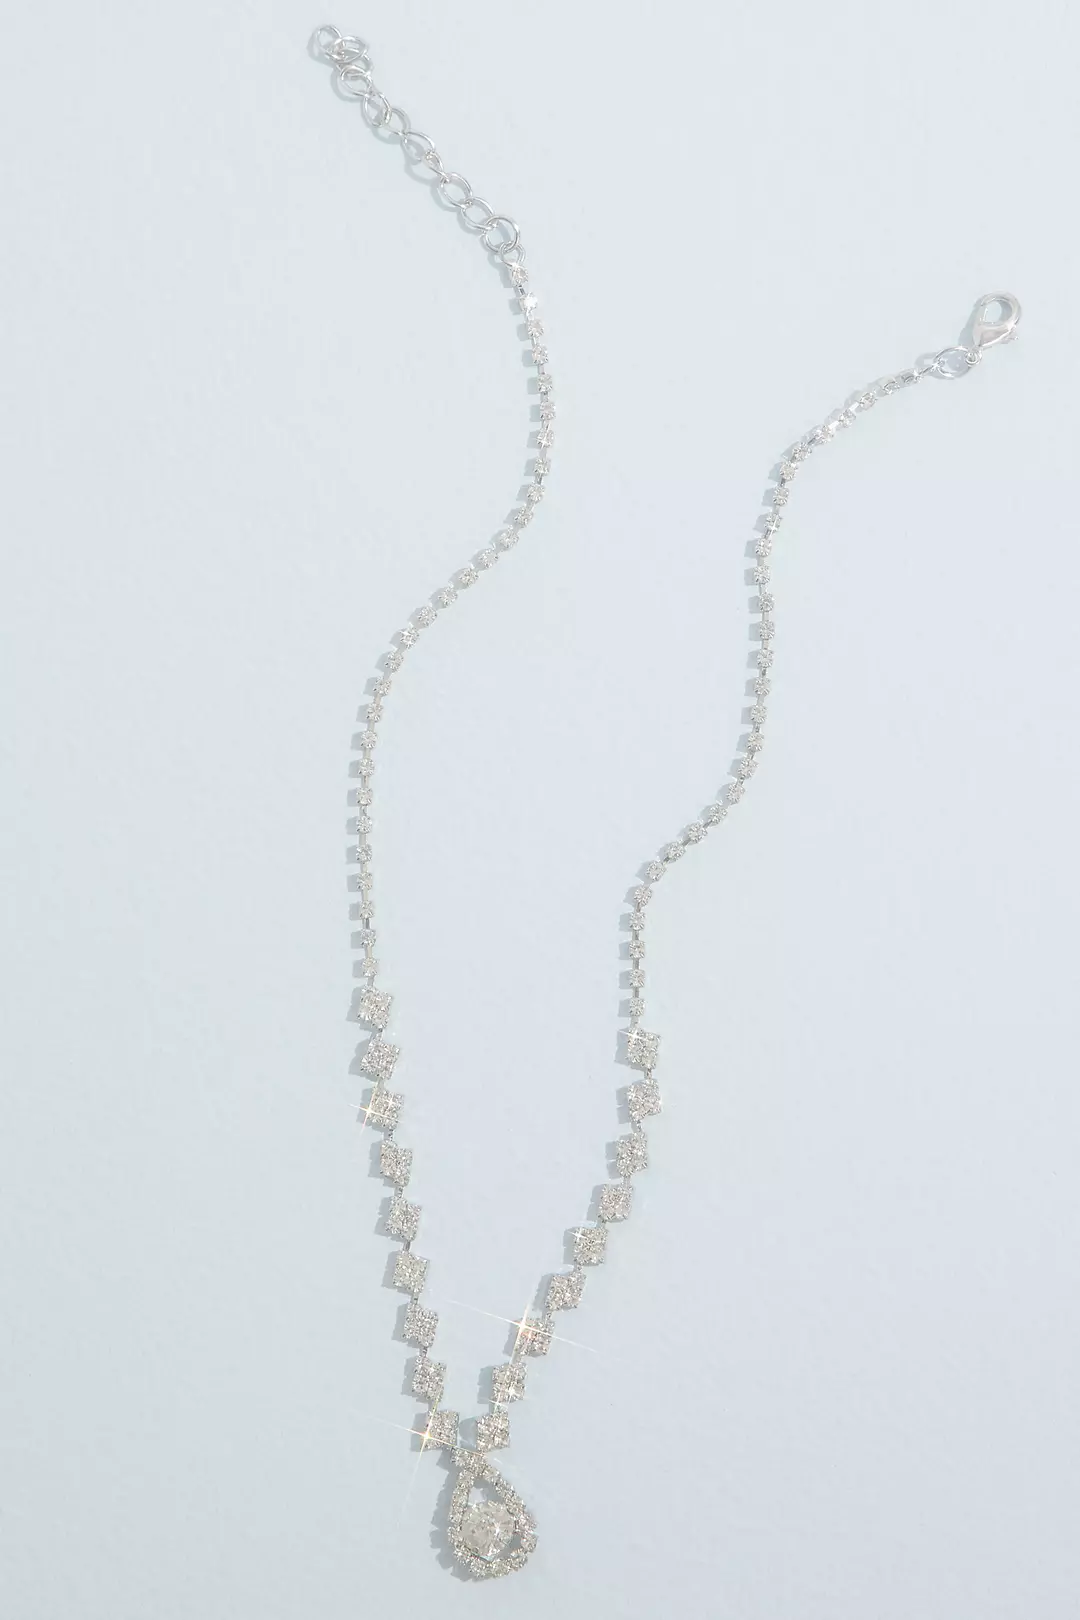 Crystal Teardrop Necklace and Earring Set Image 2